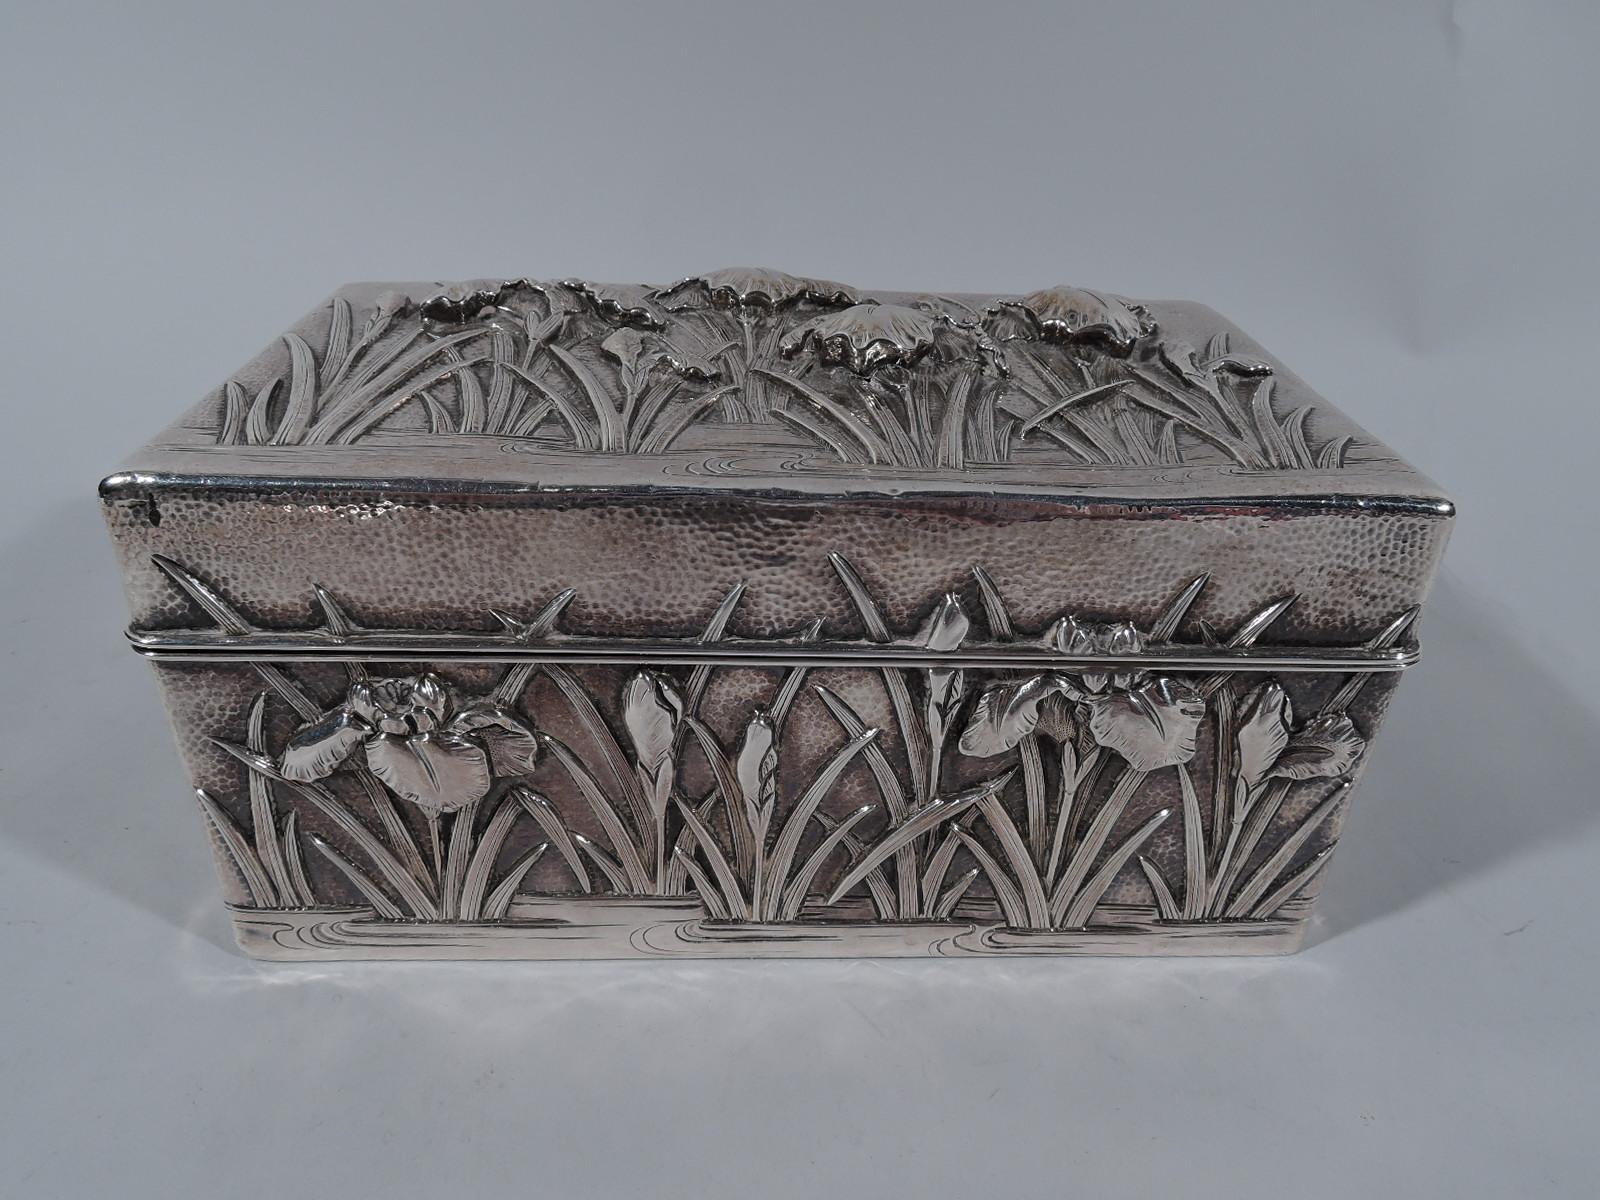 Turn-of-the-century Japanese sterling silver casket box. Retailed by Arthur & Bond in Yokoyama. Rectangular with hinged cover. Cover top and sides decorated with iris flowers set in eddying water. Ornament applied, chased, and engraved; ground